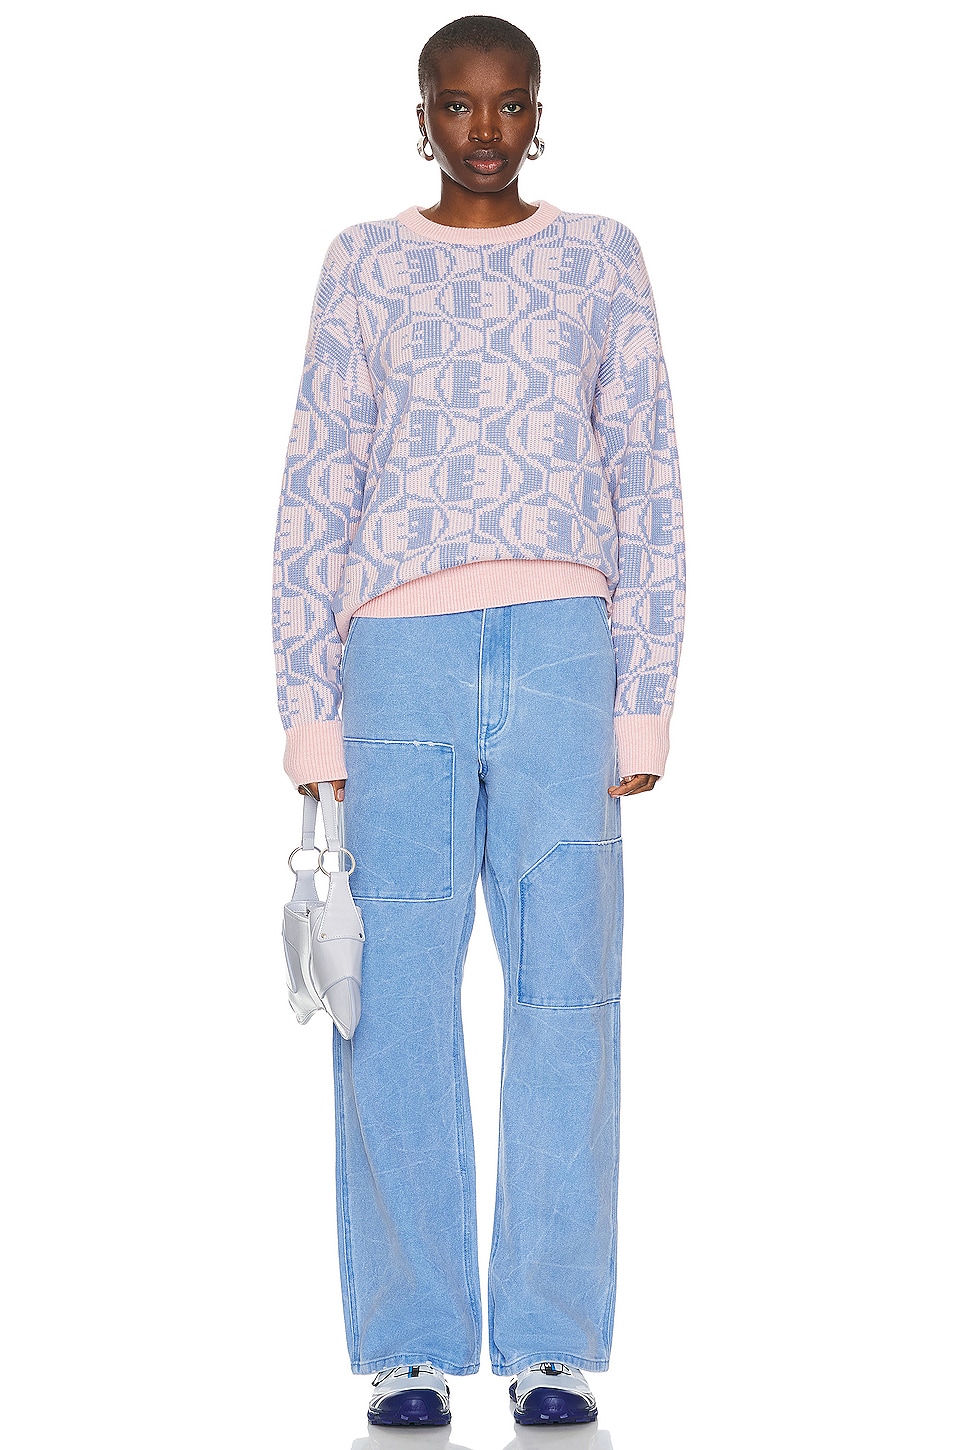 Acne Studios Clothing - Shoes, Sandals, Dresses, Bomber & Leather Jackets